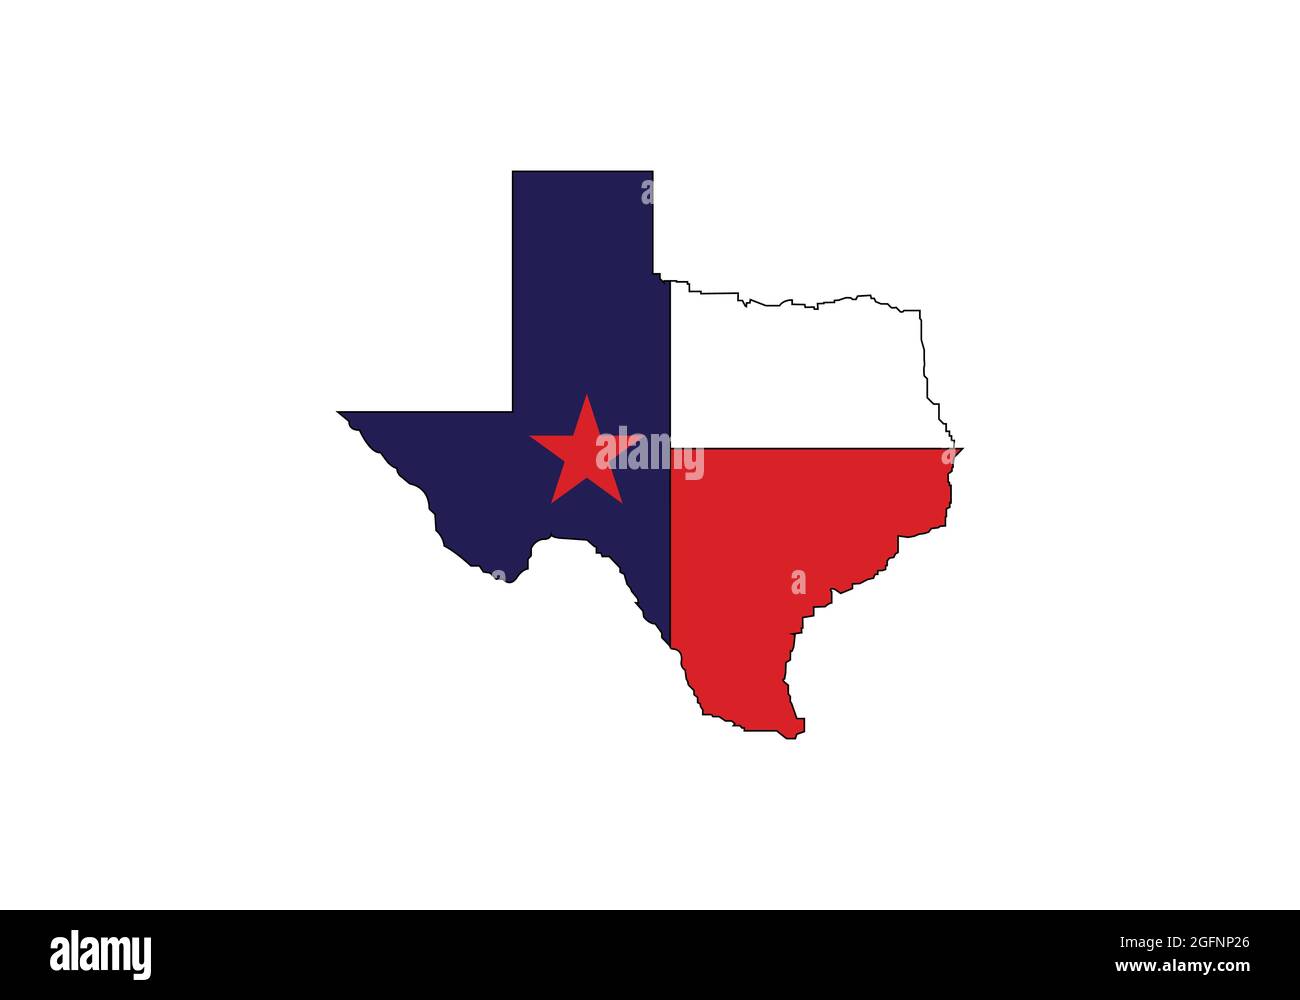 TEXAS MAP SYMBOL the United States of America Outline Stock Vector